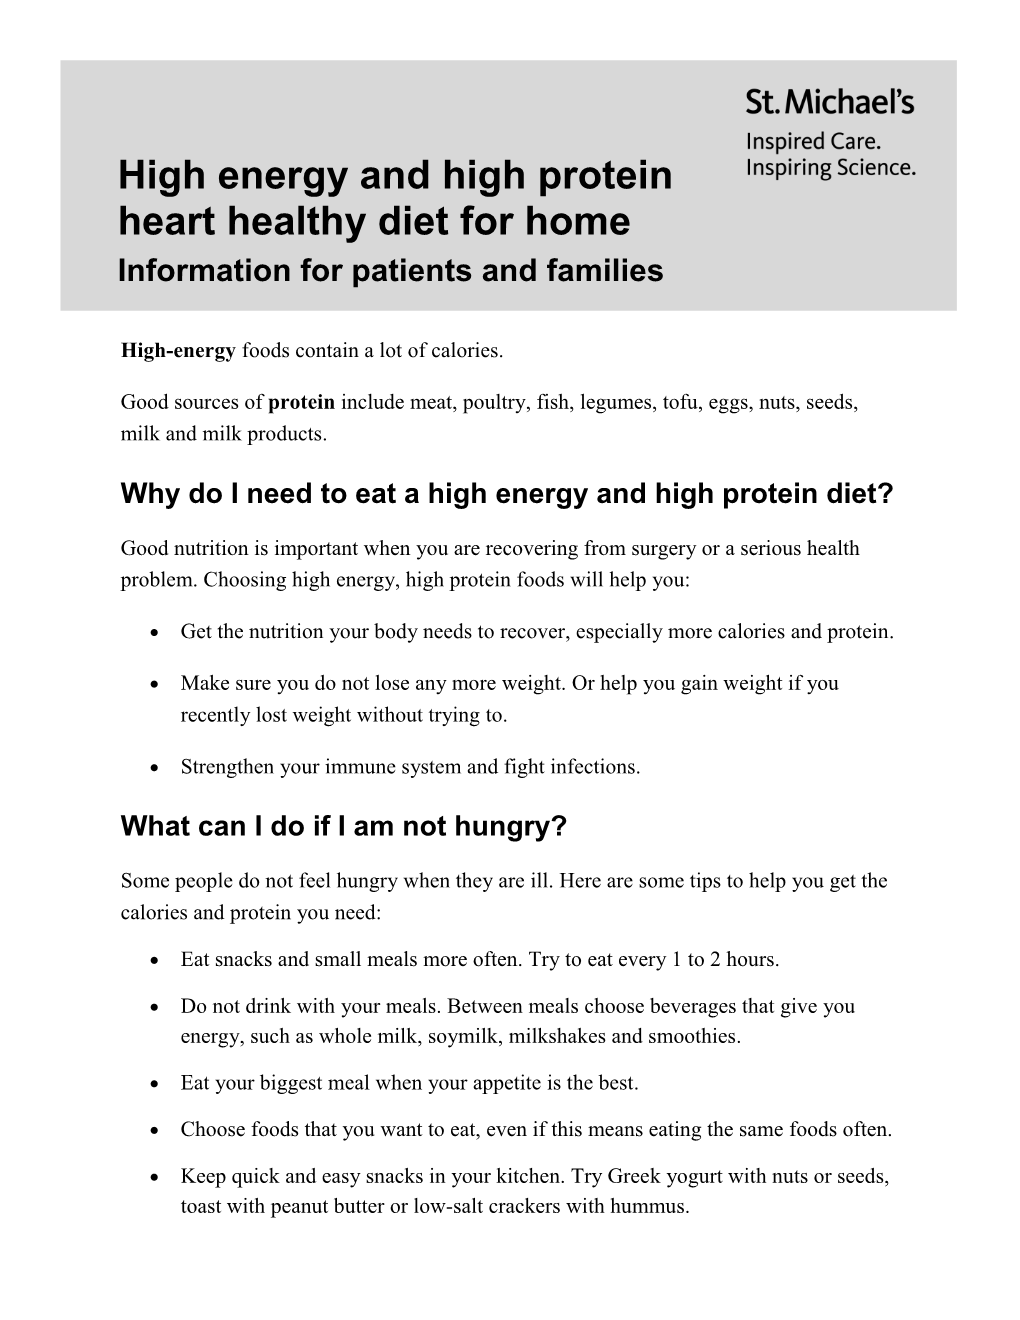 High Energy and High Protein Heart Healthy Diet for Home